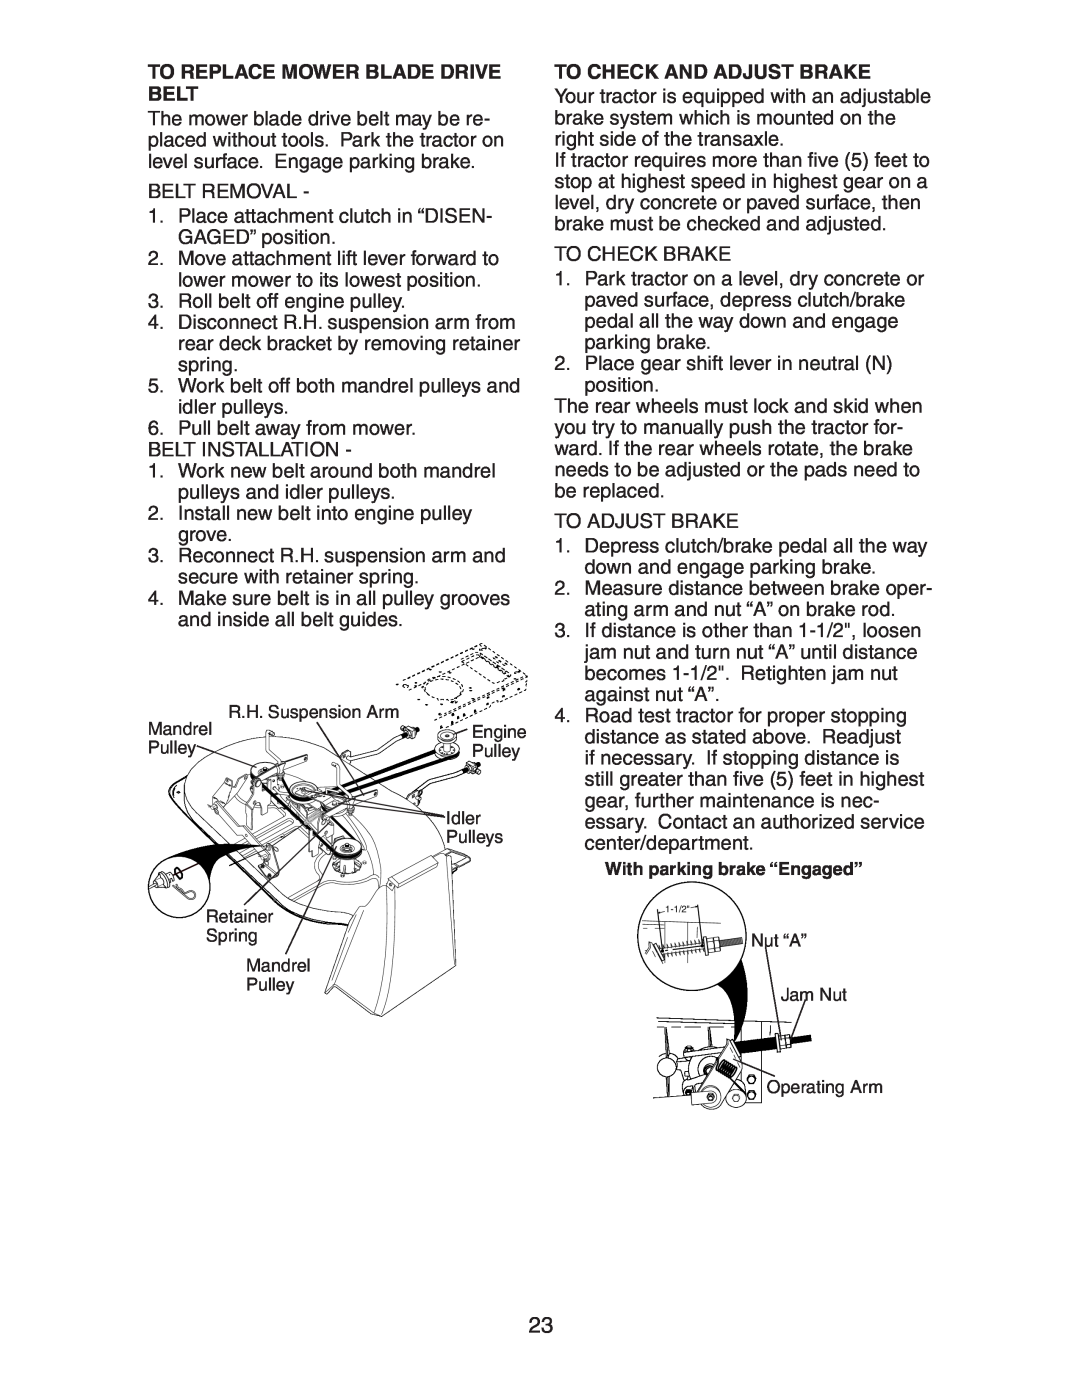 Electrolux AG15538A manual To Replace Mower Blade Drive Belt, To Check And Adjust Brake, With parking brake “Engaged” 